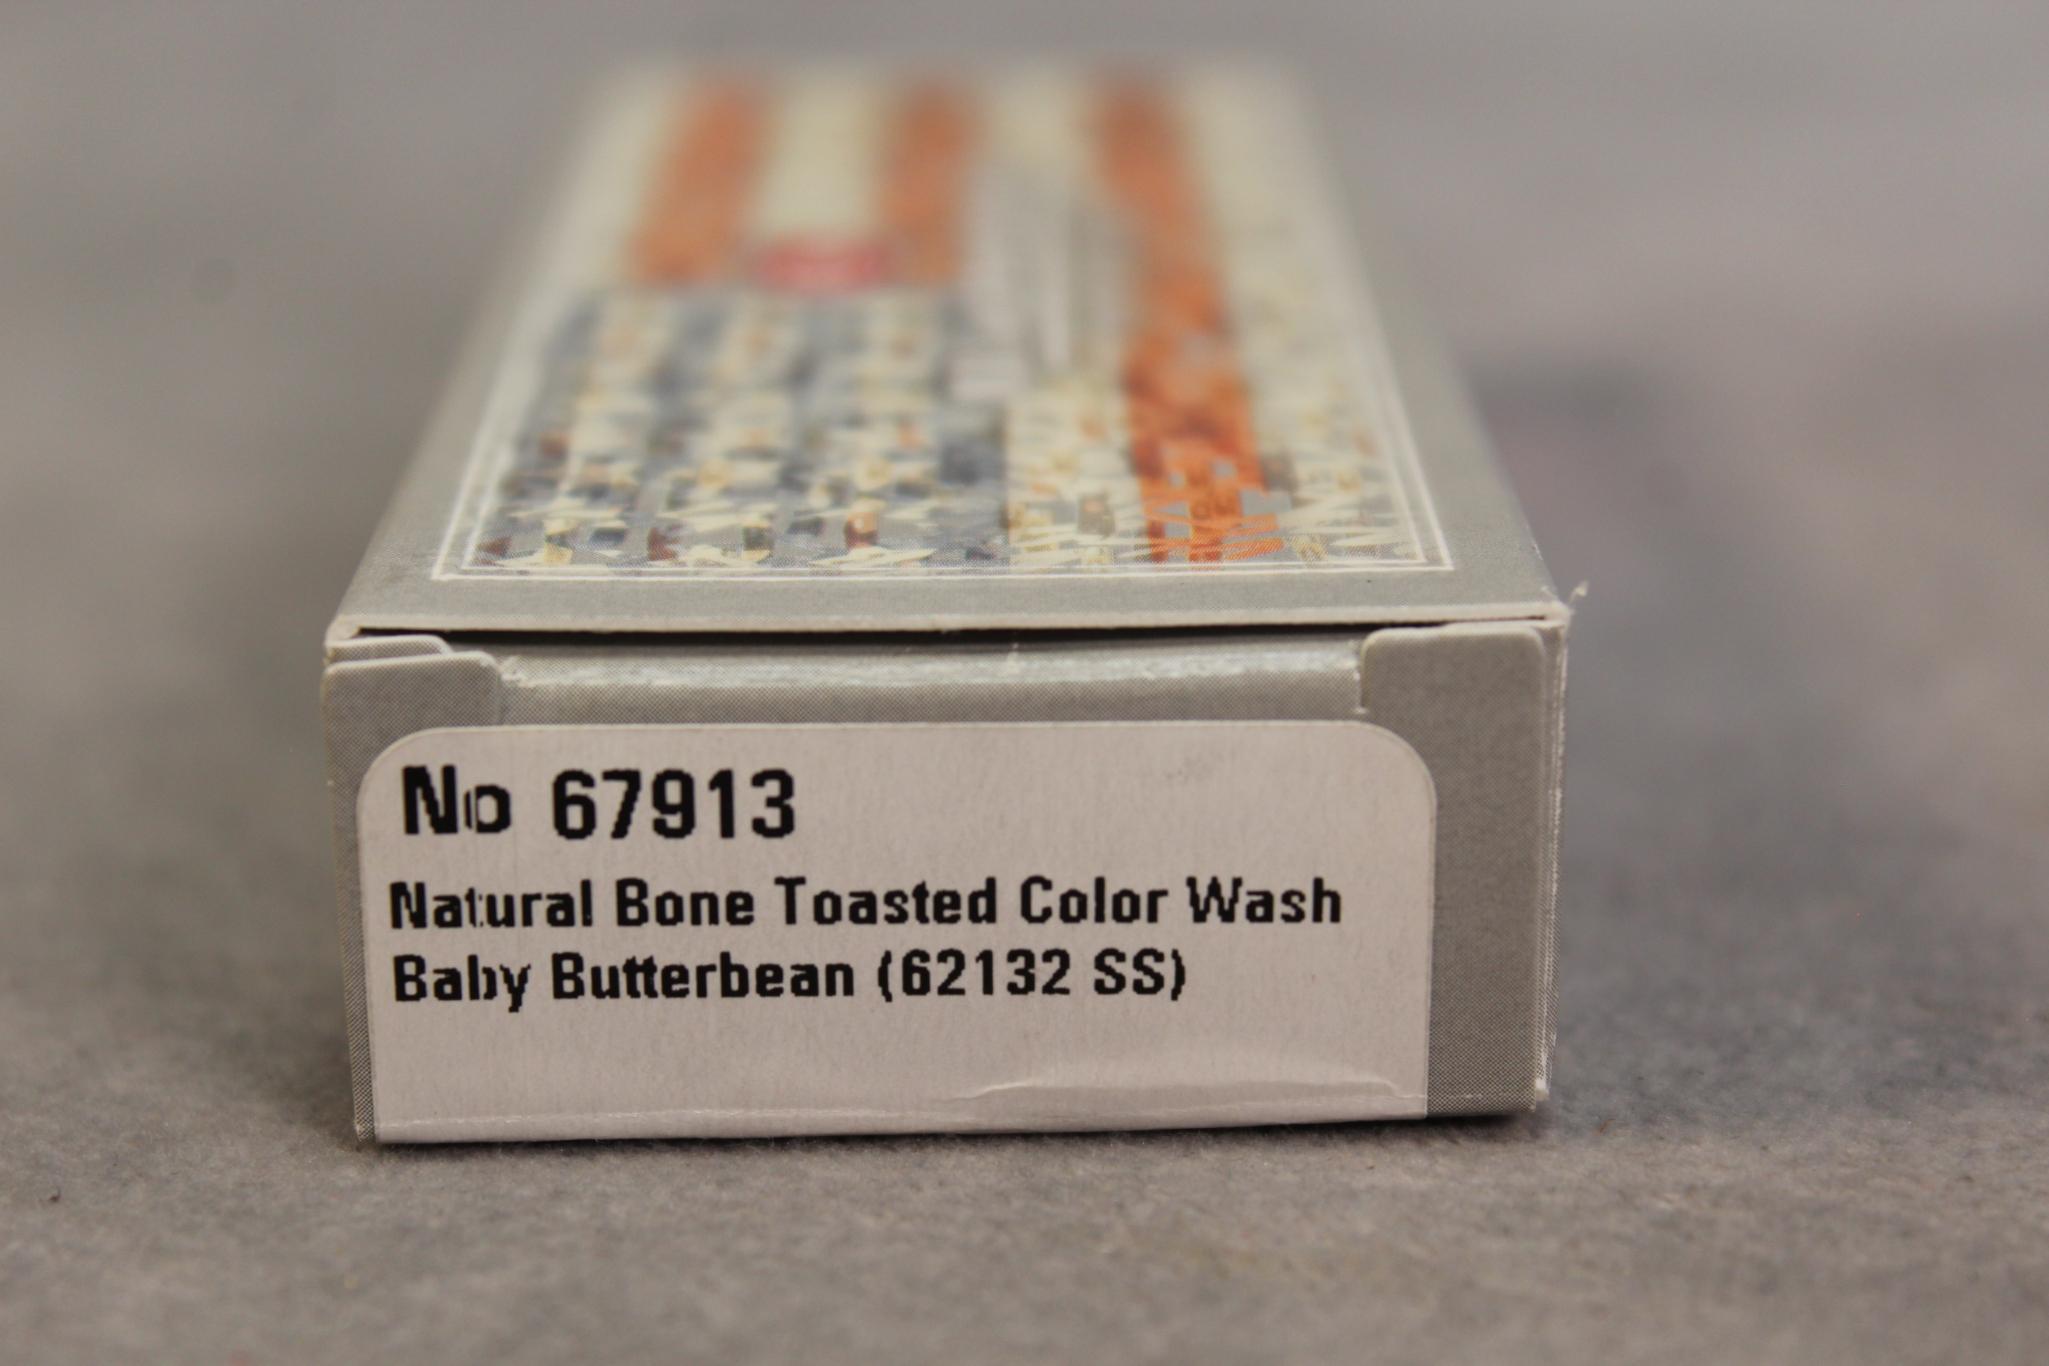 2019 CASE BABY BUTTERBEAN NATRL TOASTED COLORWASH 62132  SS